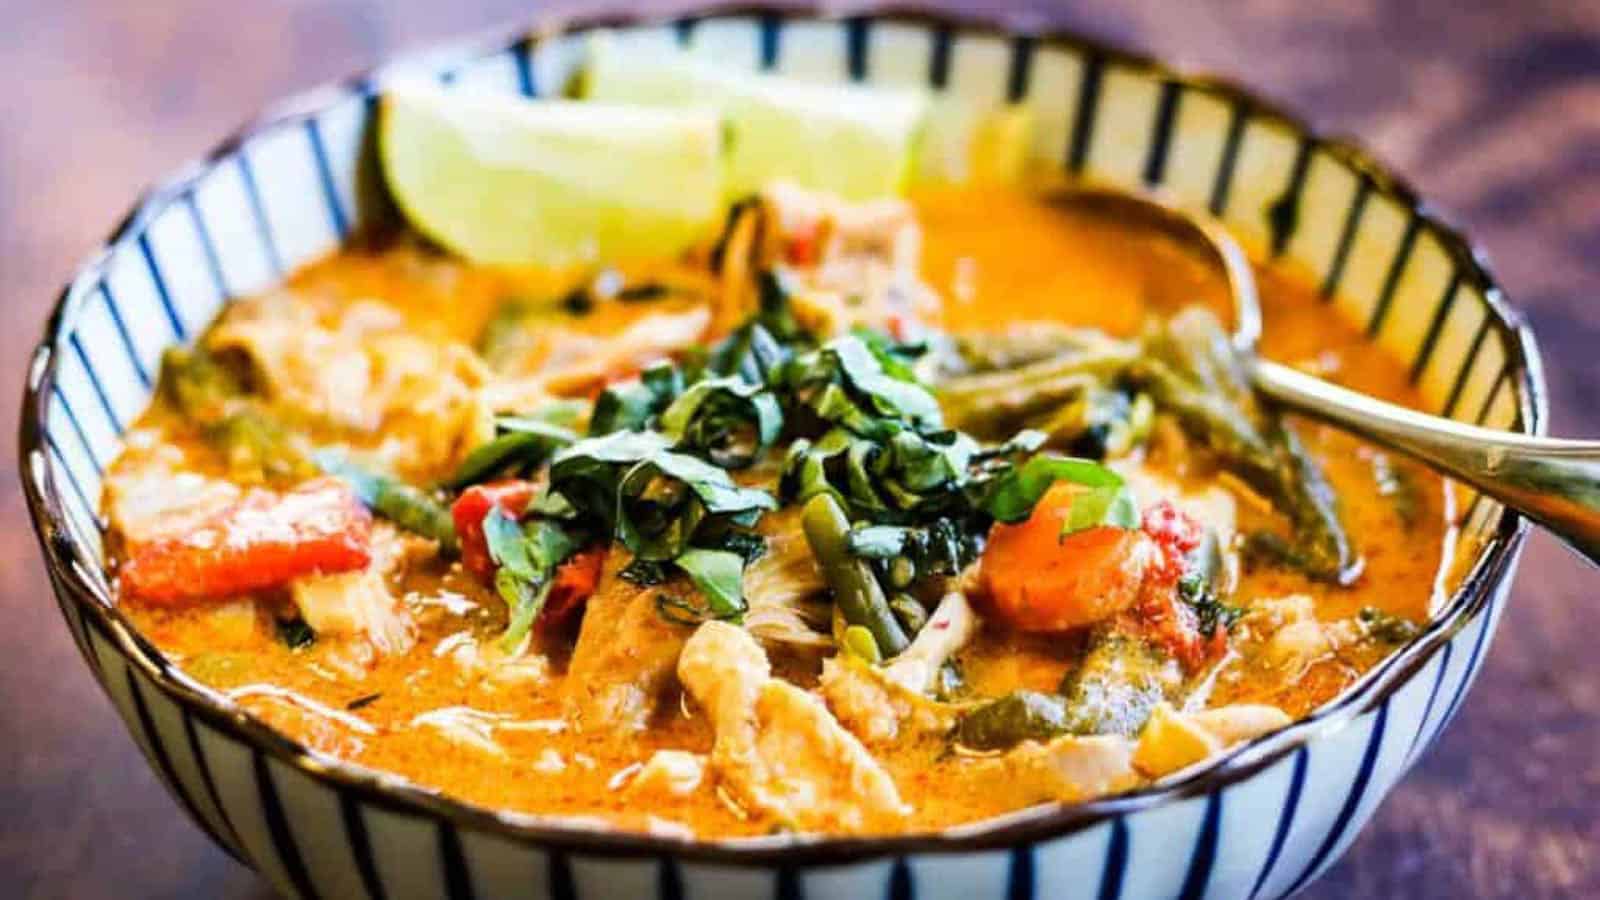 <p>Thai Chicken Curry is more than just a chicken dish. It’s about a dance of flavors that result in a beautifully complex dish. A meal you wouldn’t want to pass up, for sure!<br><strong>Get the Recipe: </strong><a href="https://allwaysdelicious.com/thai-chicken-curry/?utm_source=msn&utm_medium=page&utm_campaign=msn">Thai Chicken Curry</a></p>